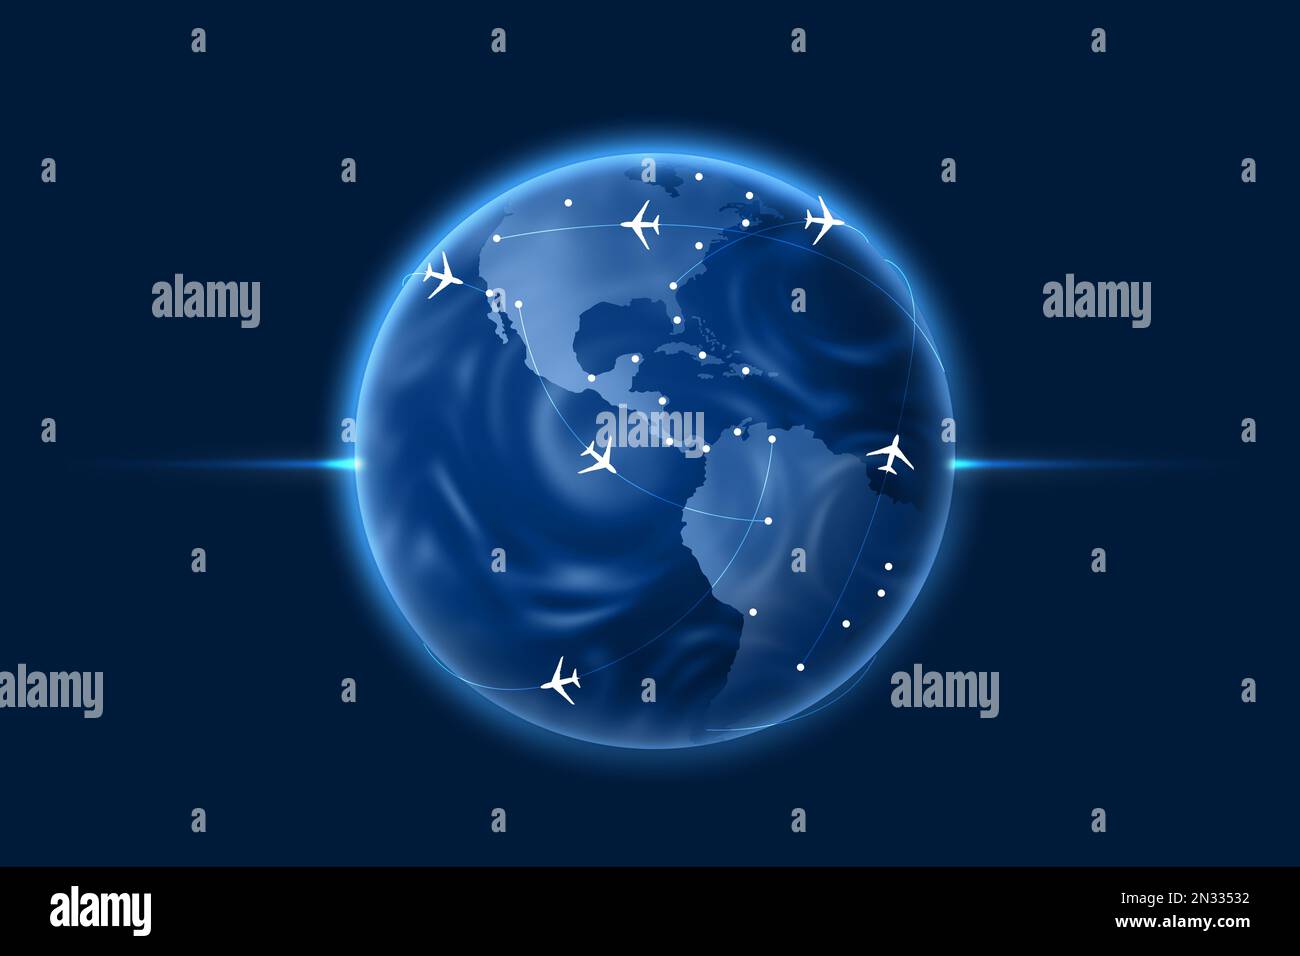 World globe with flight routs, airplanes and destinations on blue background, illustration Stock Photo